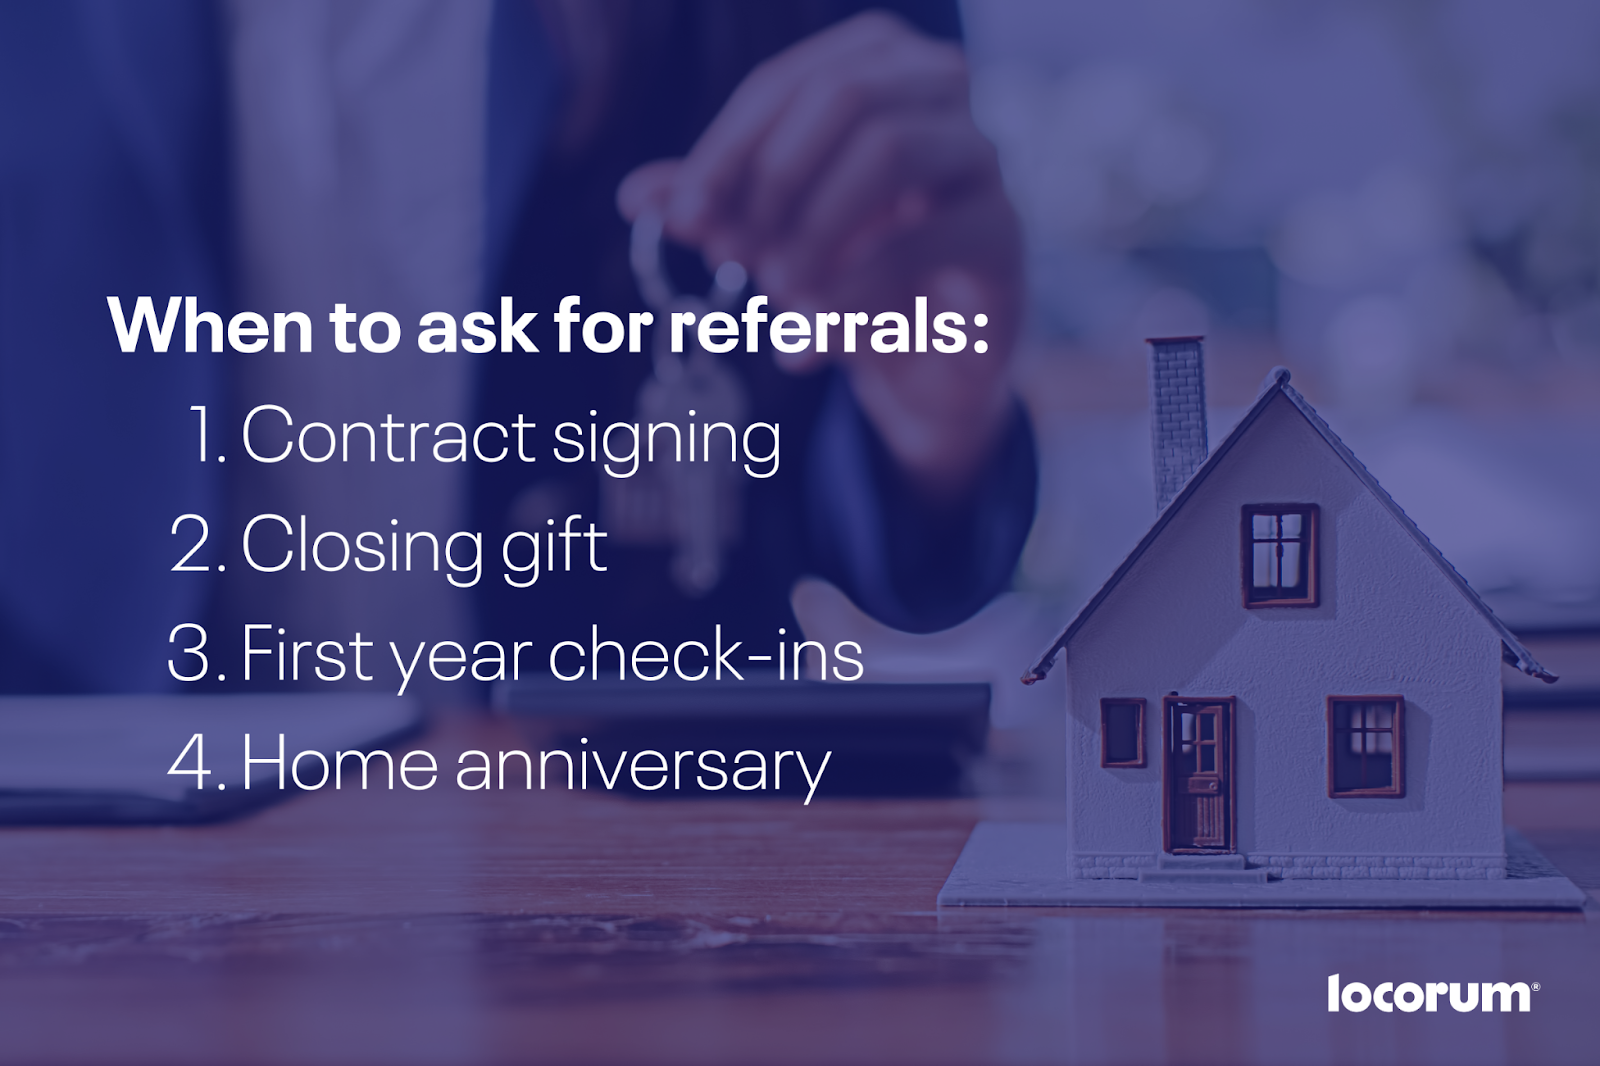 When to ask for referrals